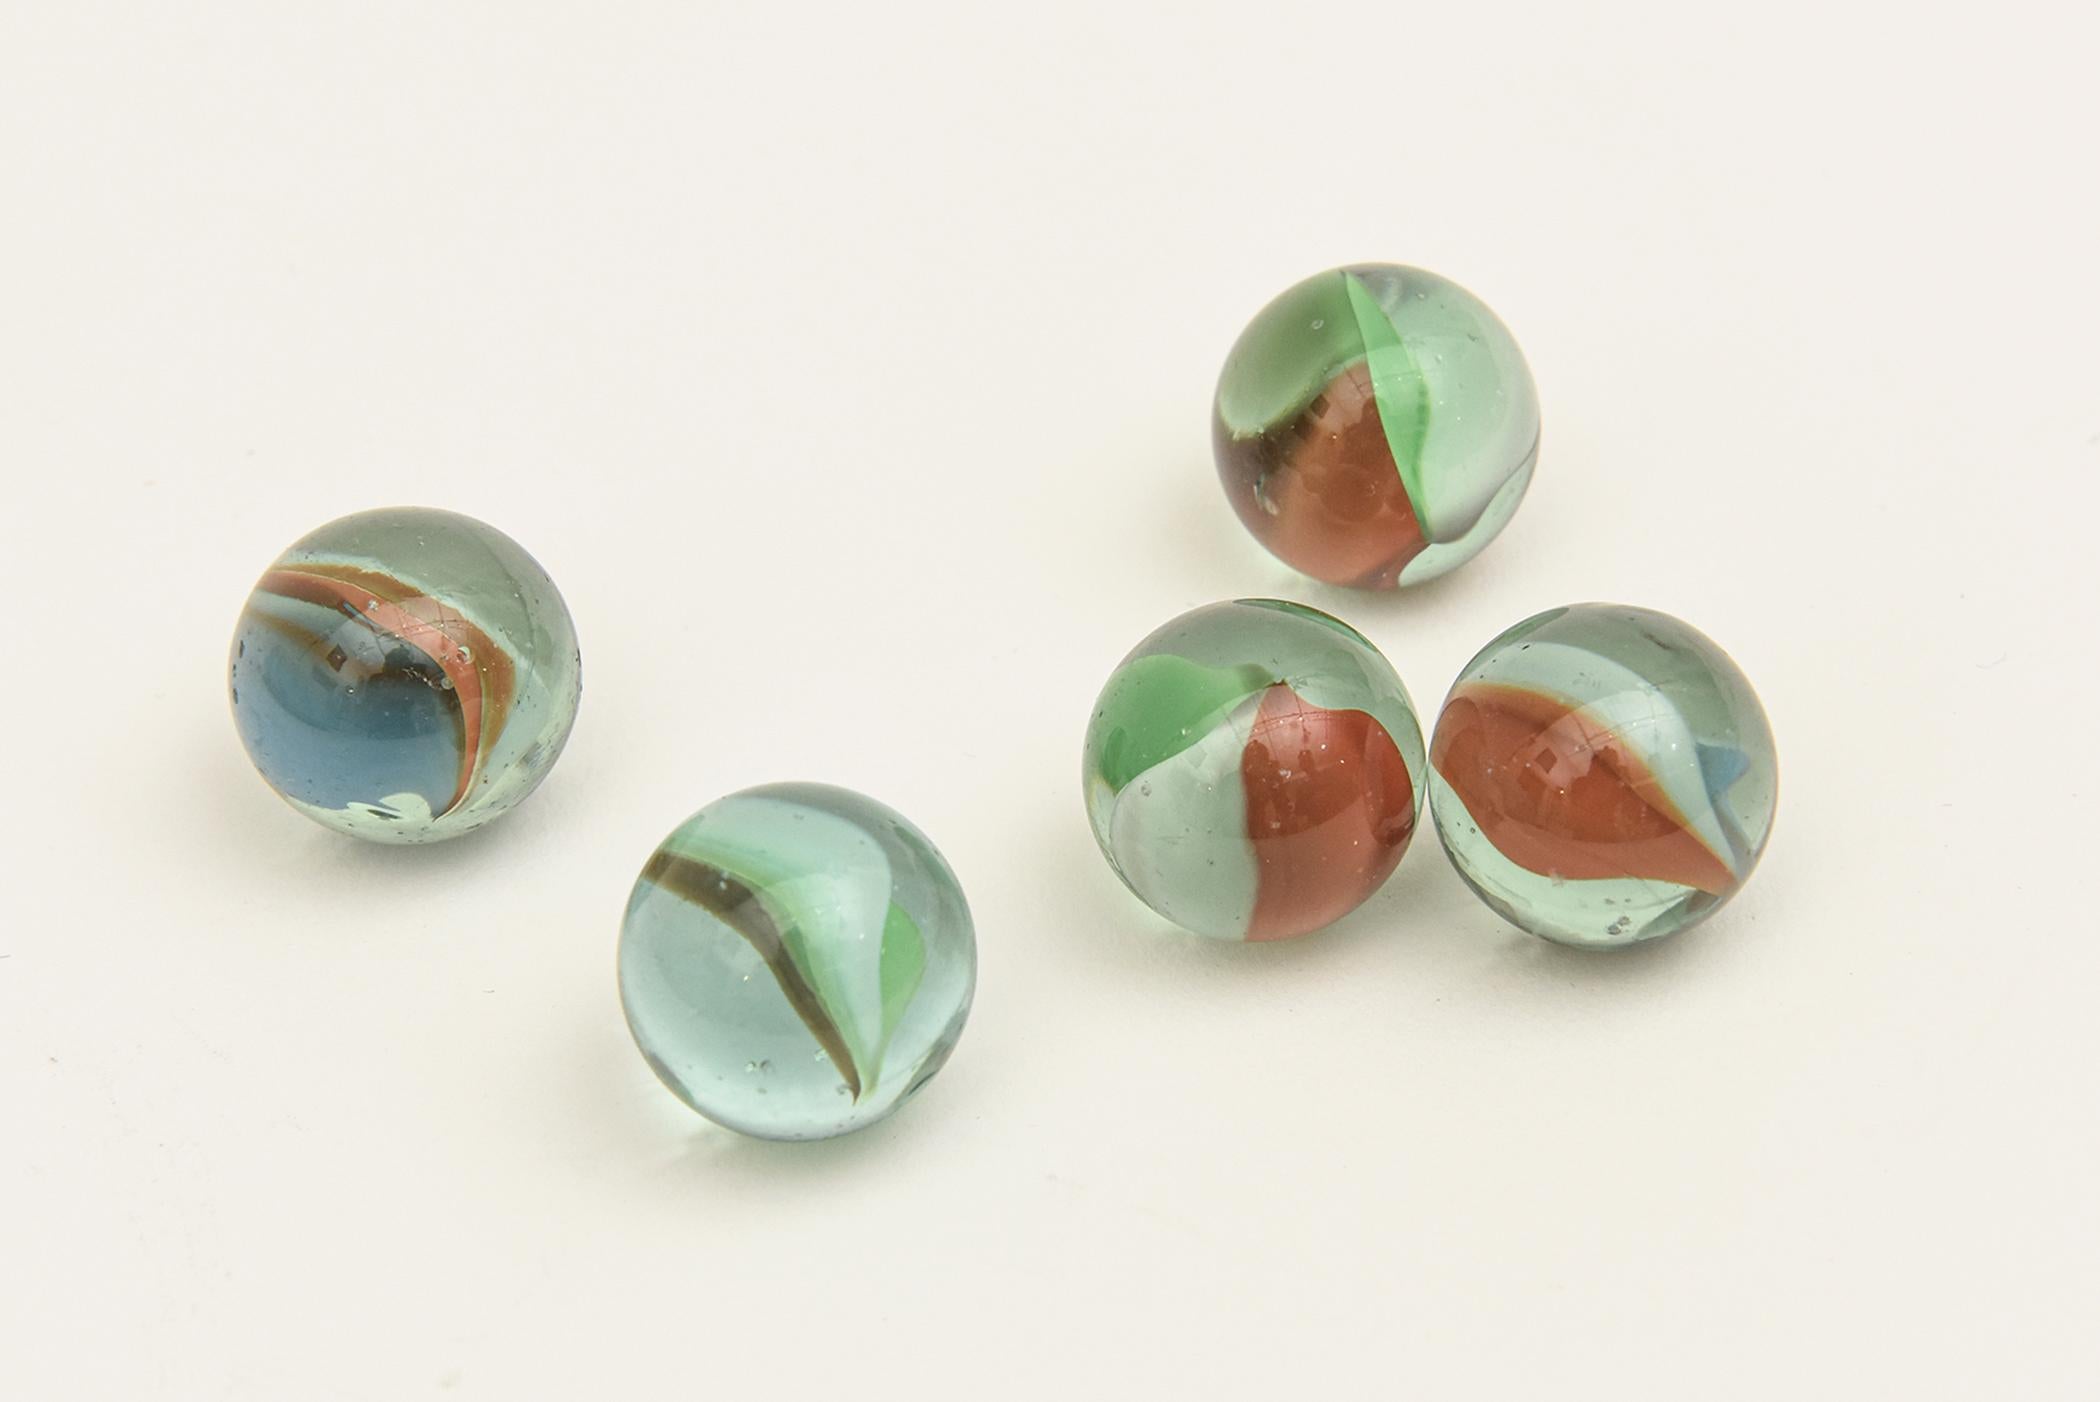 American  Cats Eye Glass Marbles Collection of 234 Mid Century Modern